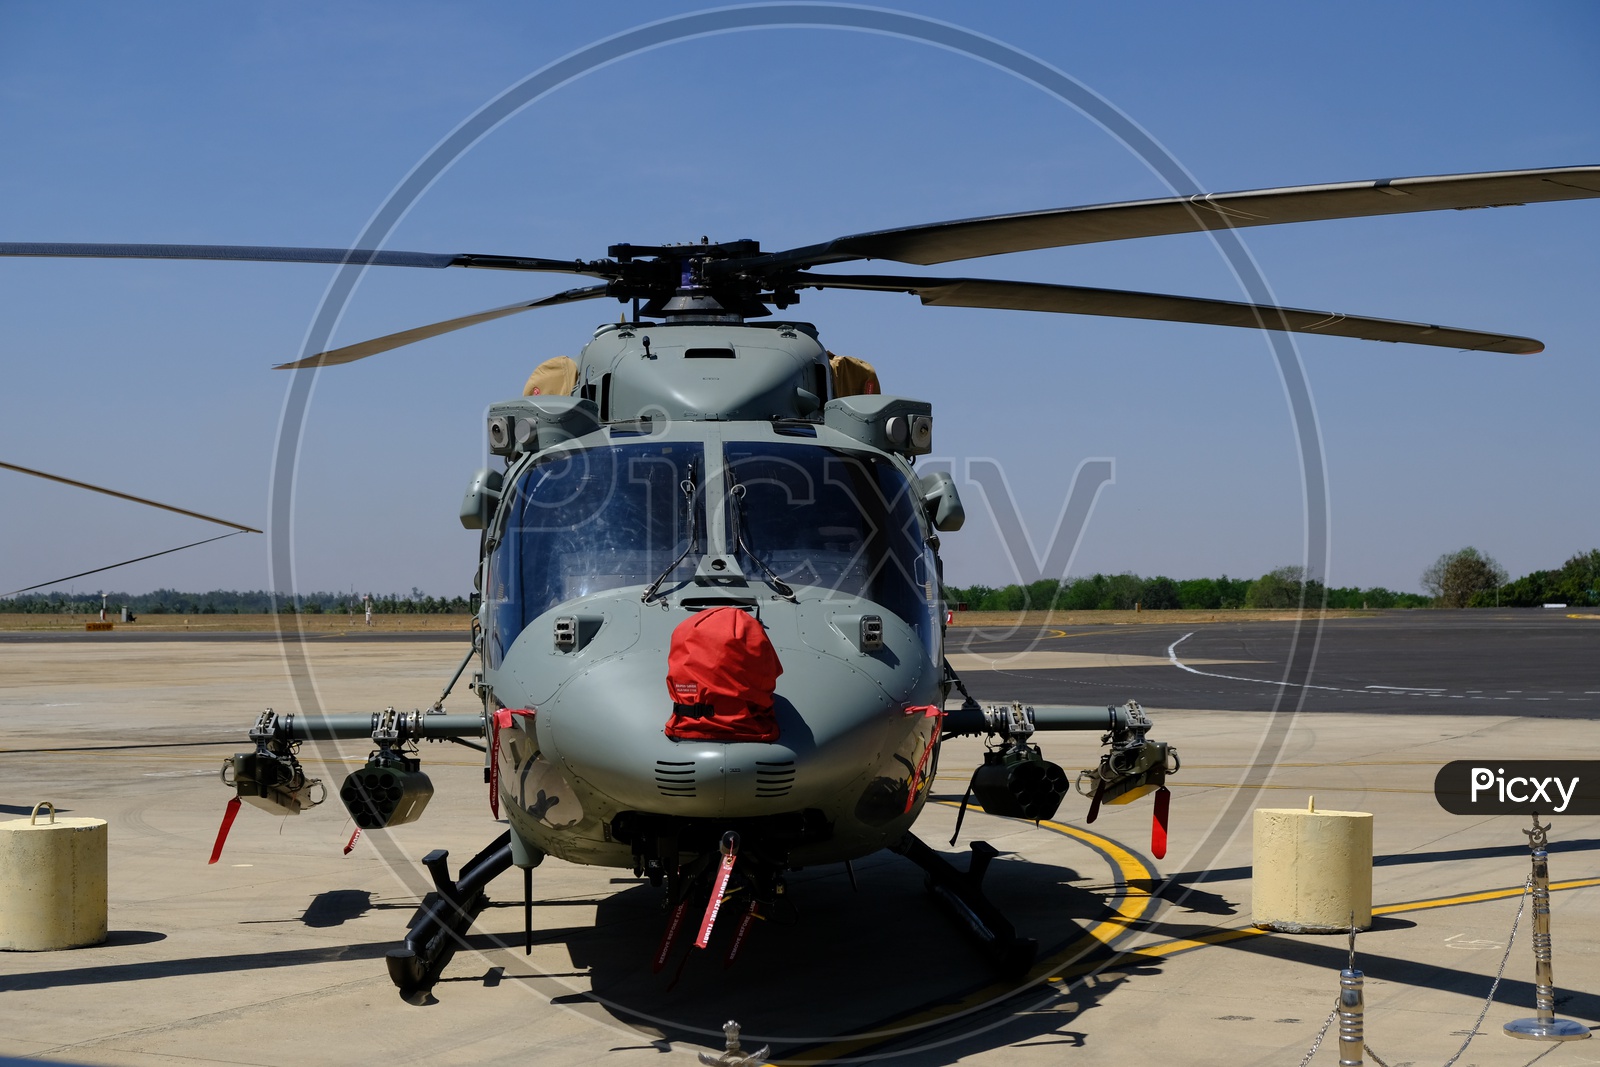 HAL Rudra is the Armed Version of ALH Dhruv at Bangalore Aero India 2019